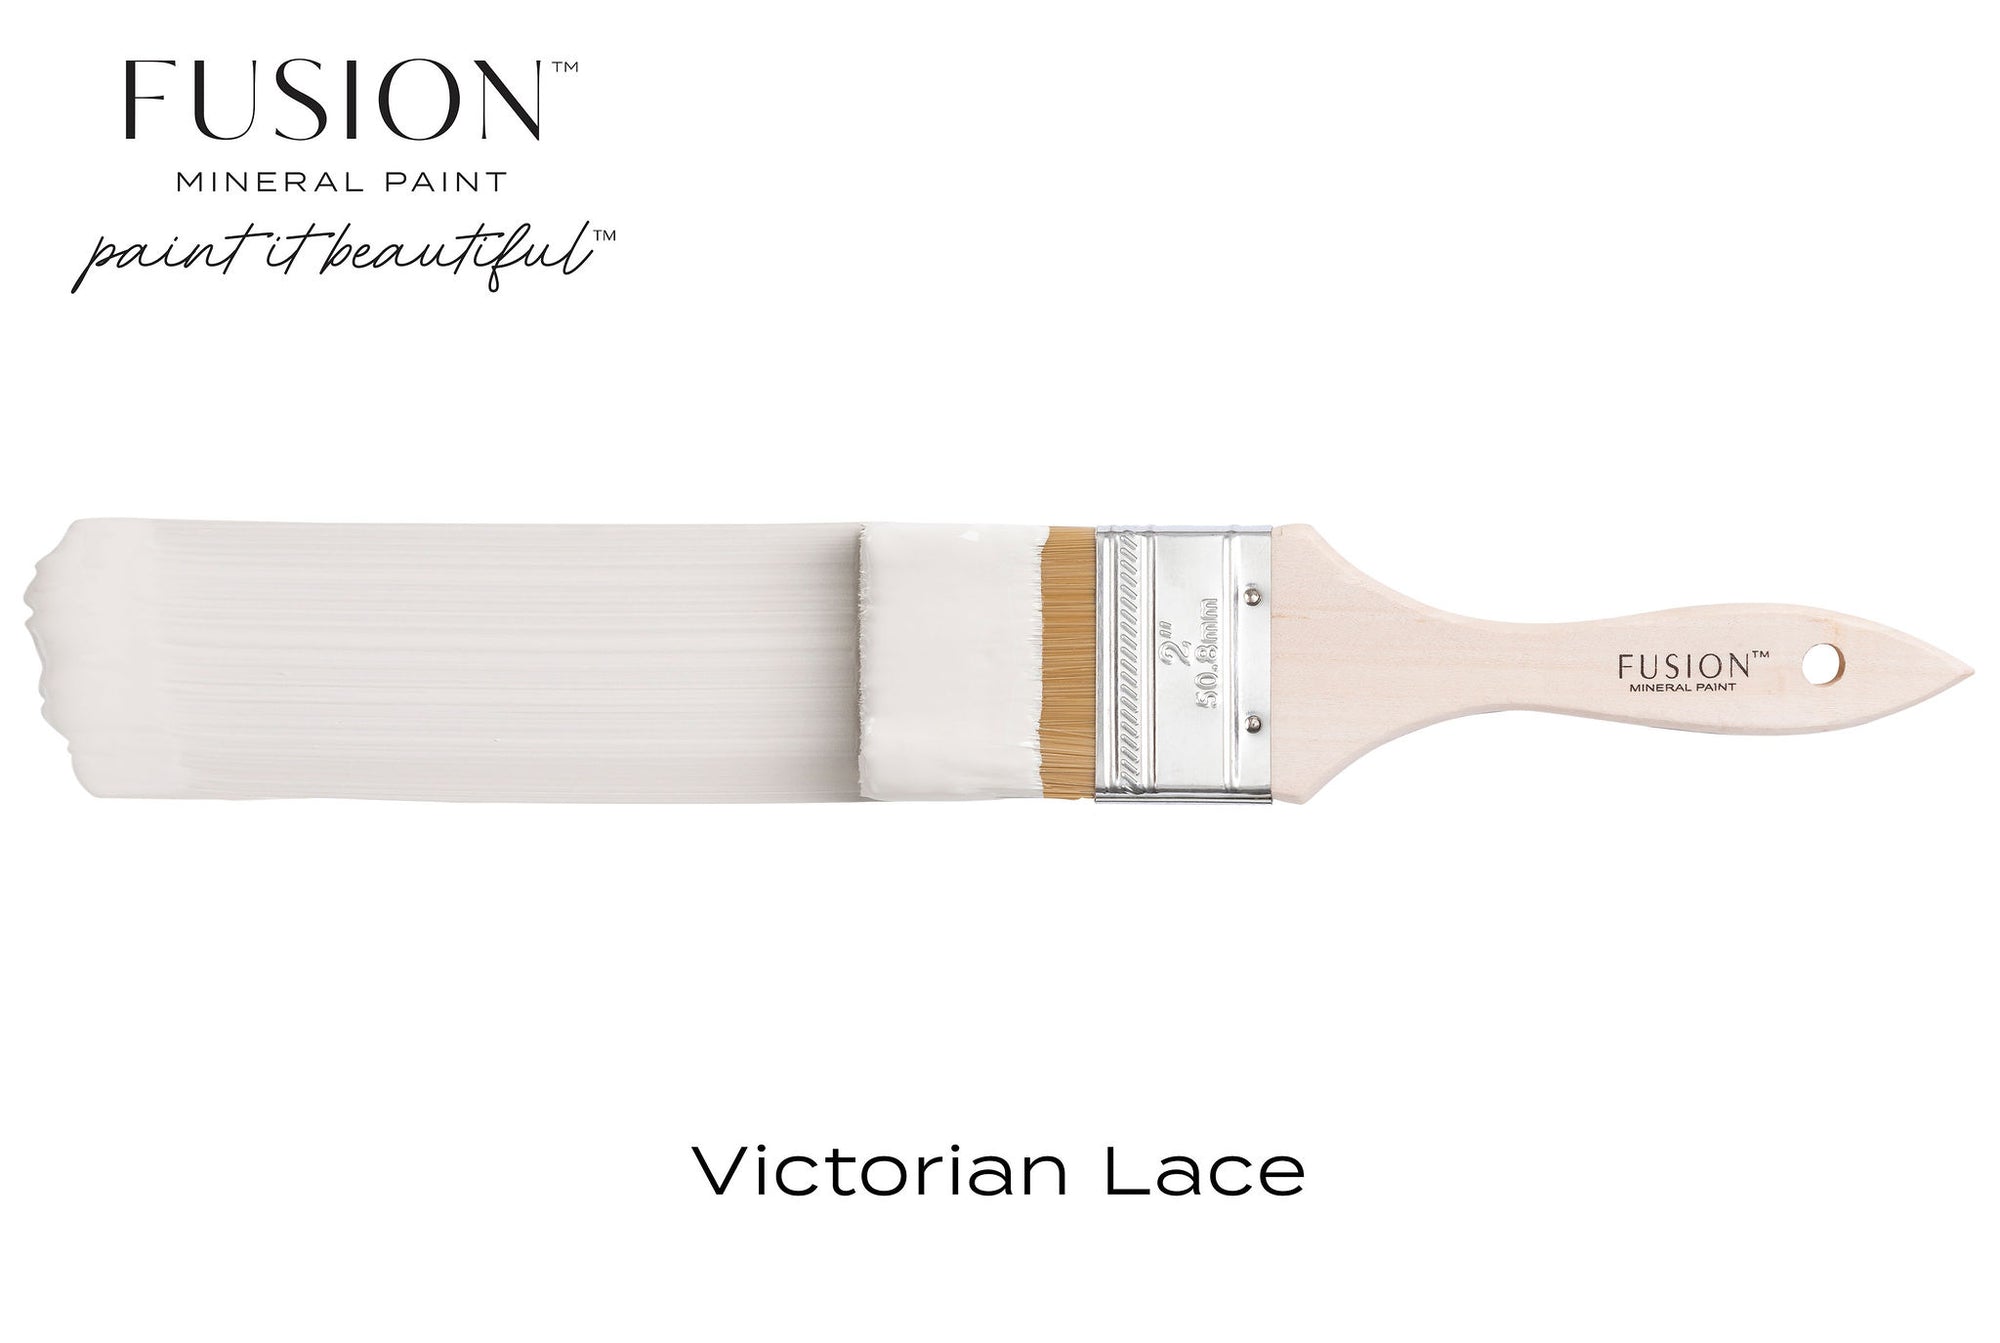 Victorian Lace-Fusion Mineral Paint - TJ's Treasures & Custom Creations